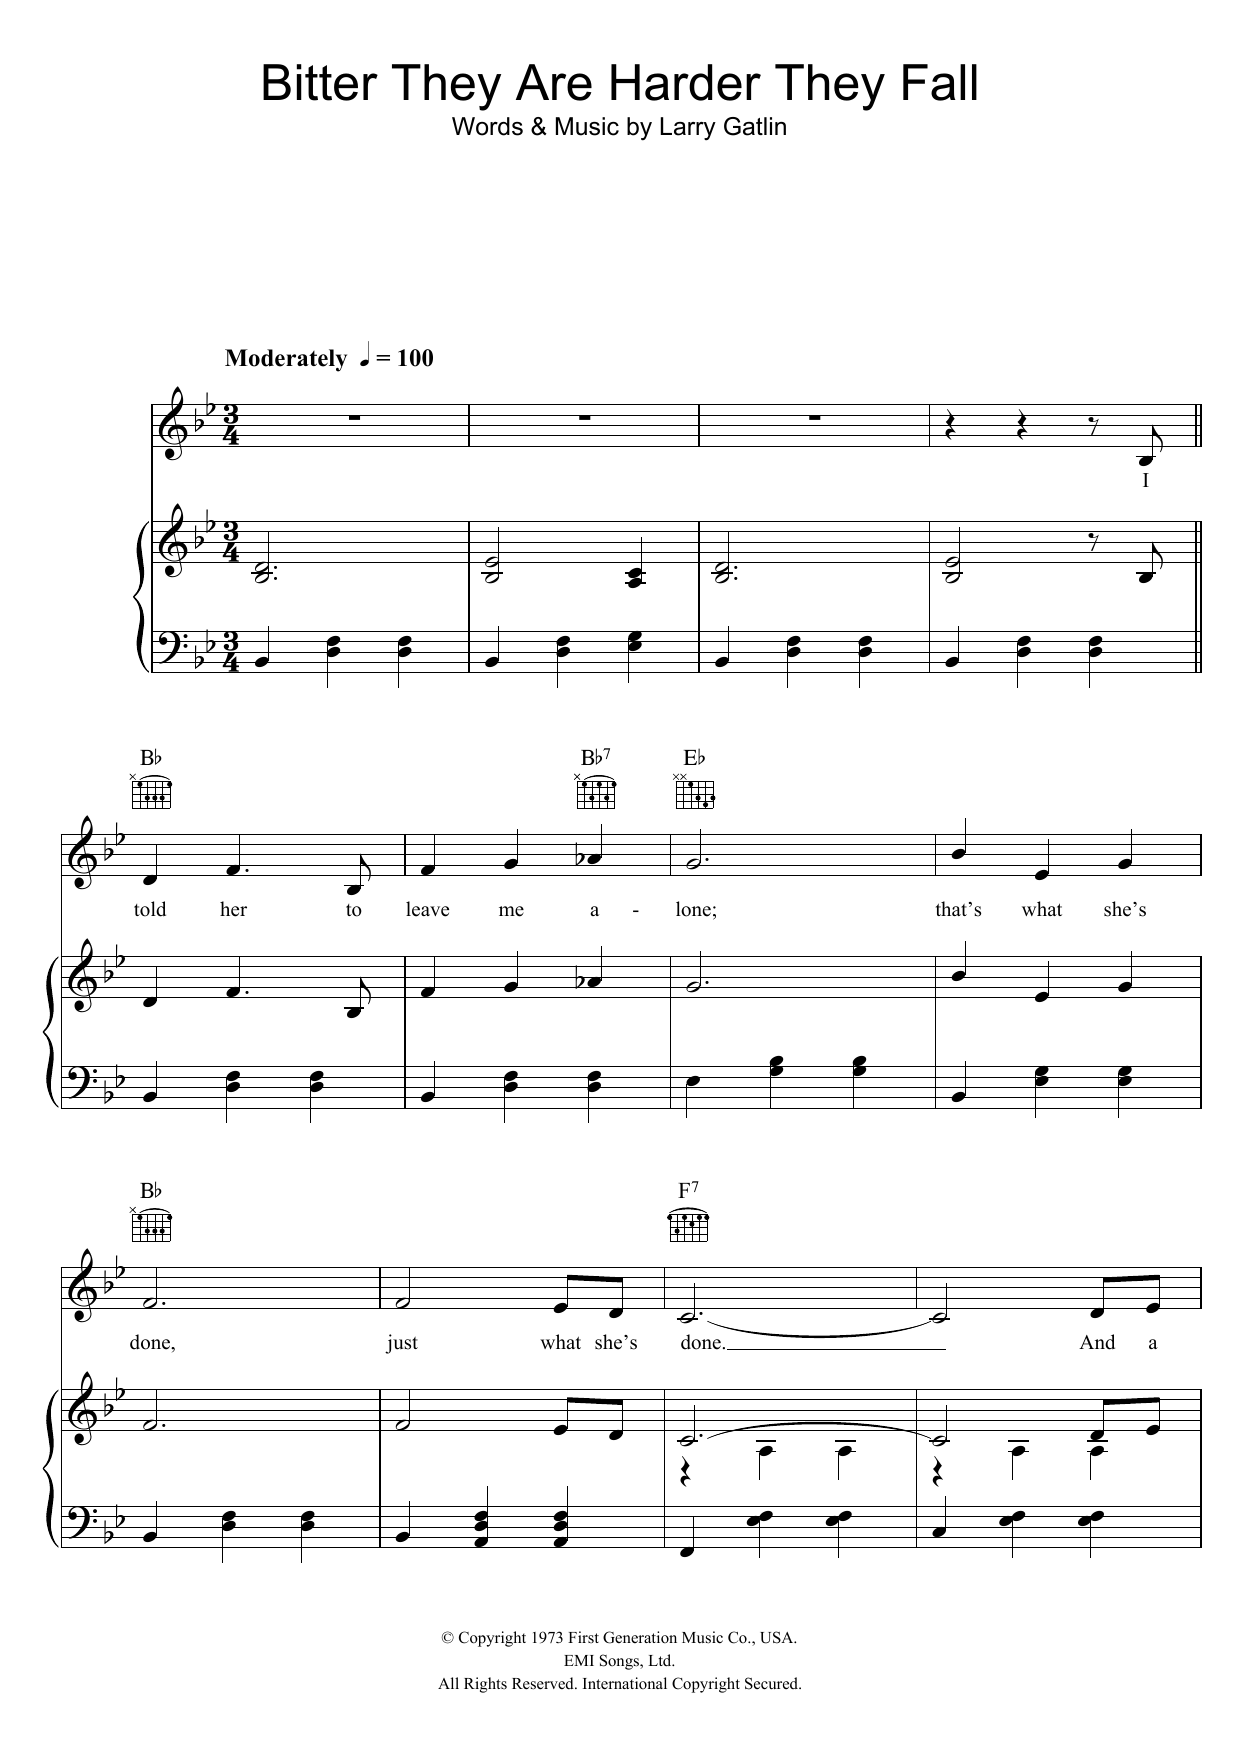 Download Elvis Presley Bitter They Are Harder They Fall Sheet Music